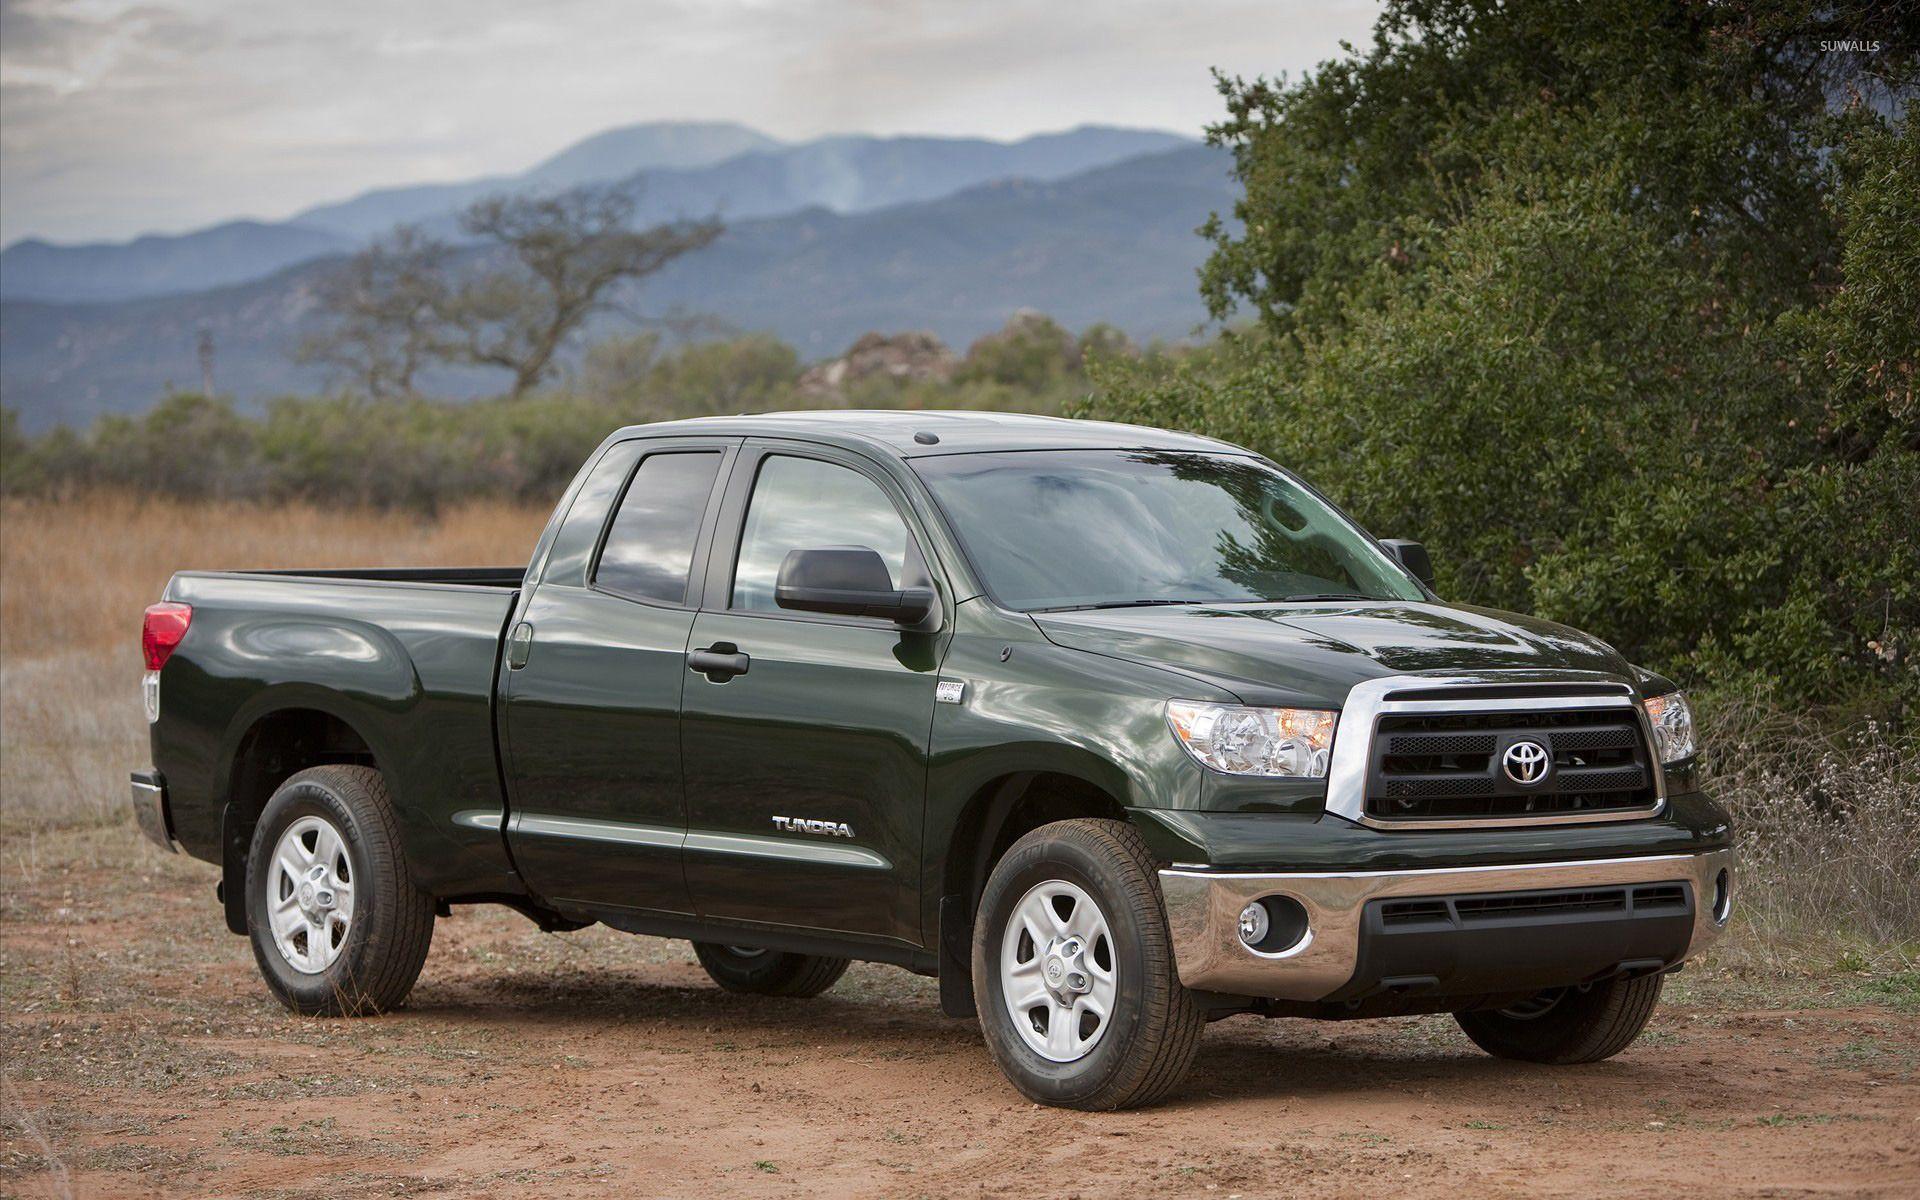 Toyota Tundra Wallpapers Top Free Toyota Tundra Backgrounds